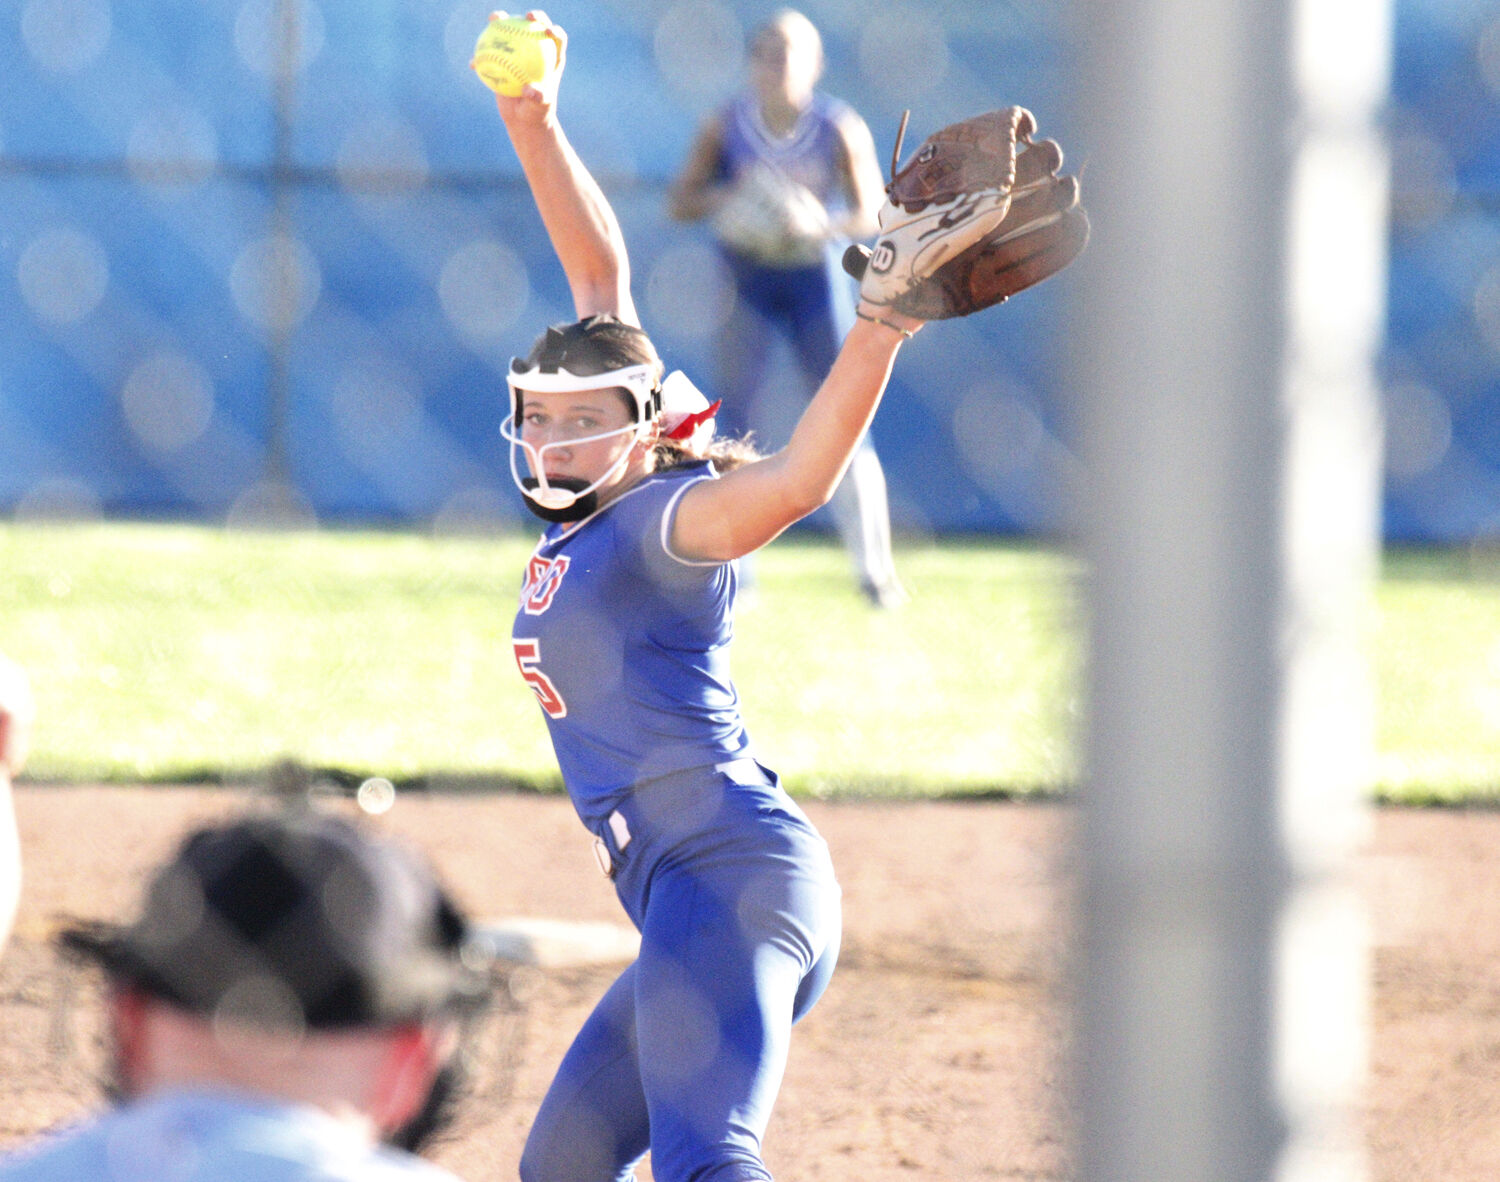 Ally Lewis Strikes Out 16 in School Record Game Against Clinton Central